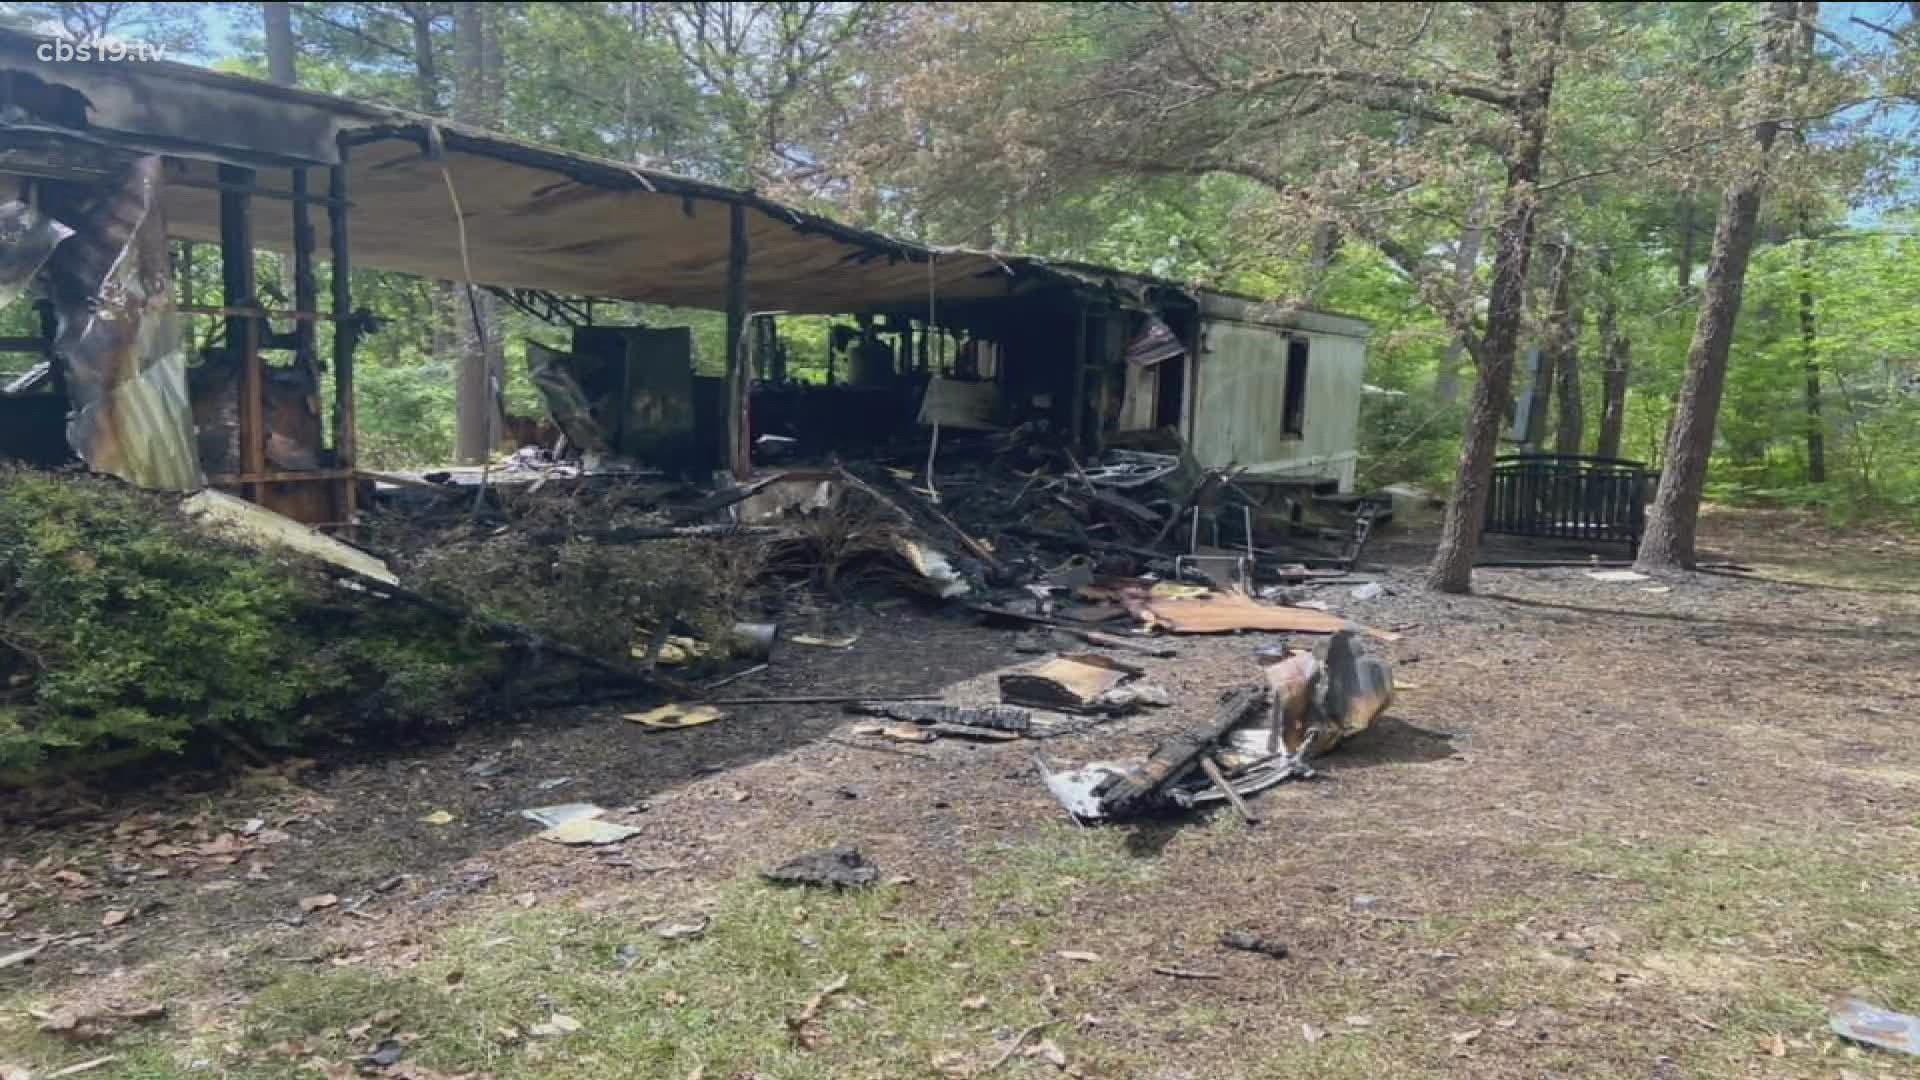 One Lindale family lost their home in a fire this week. Now they have no choice but to search.